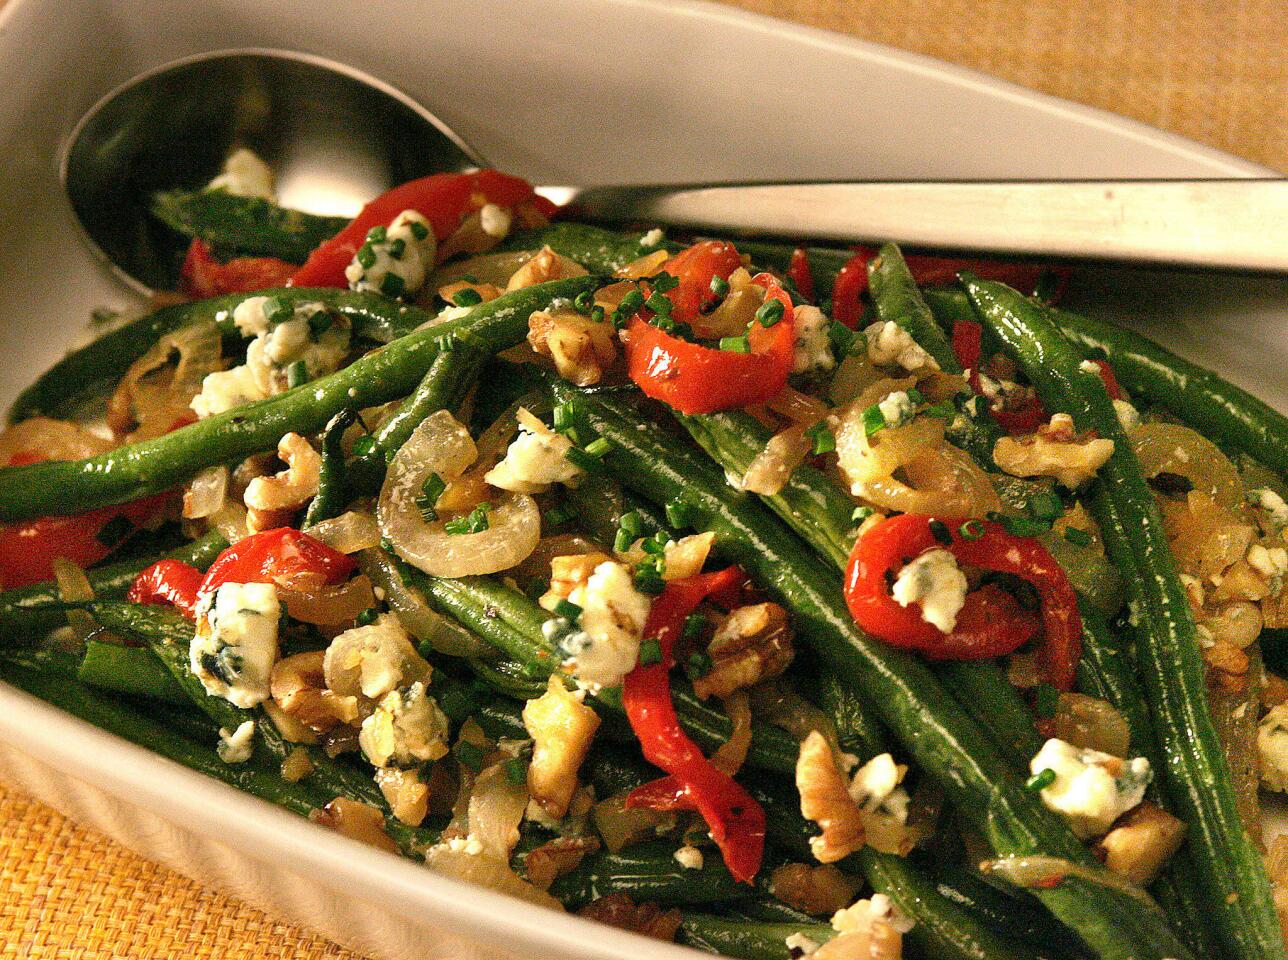 Roasted green beans with blue cheese